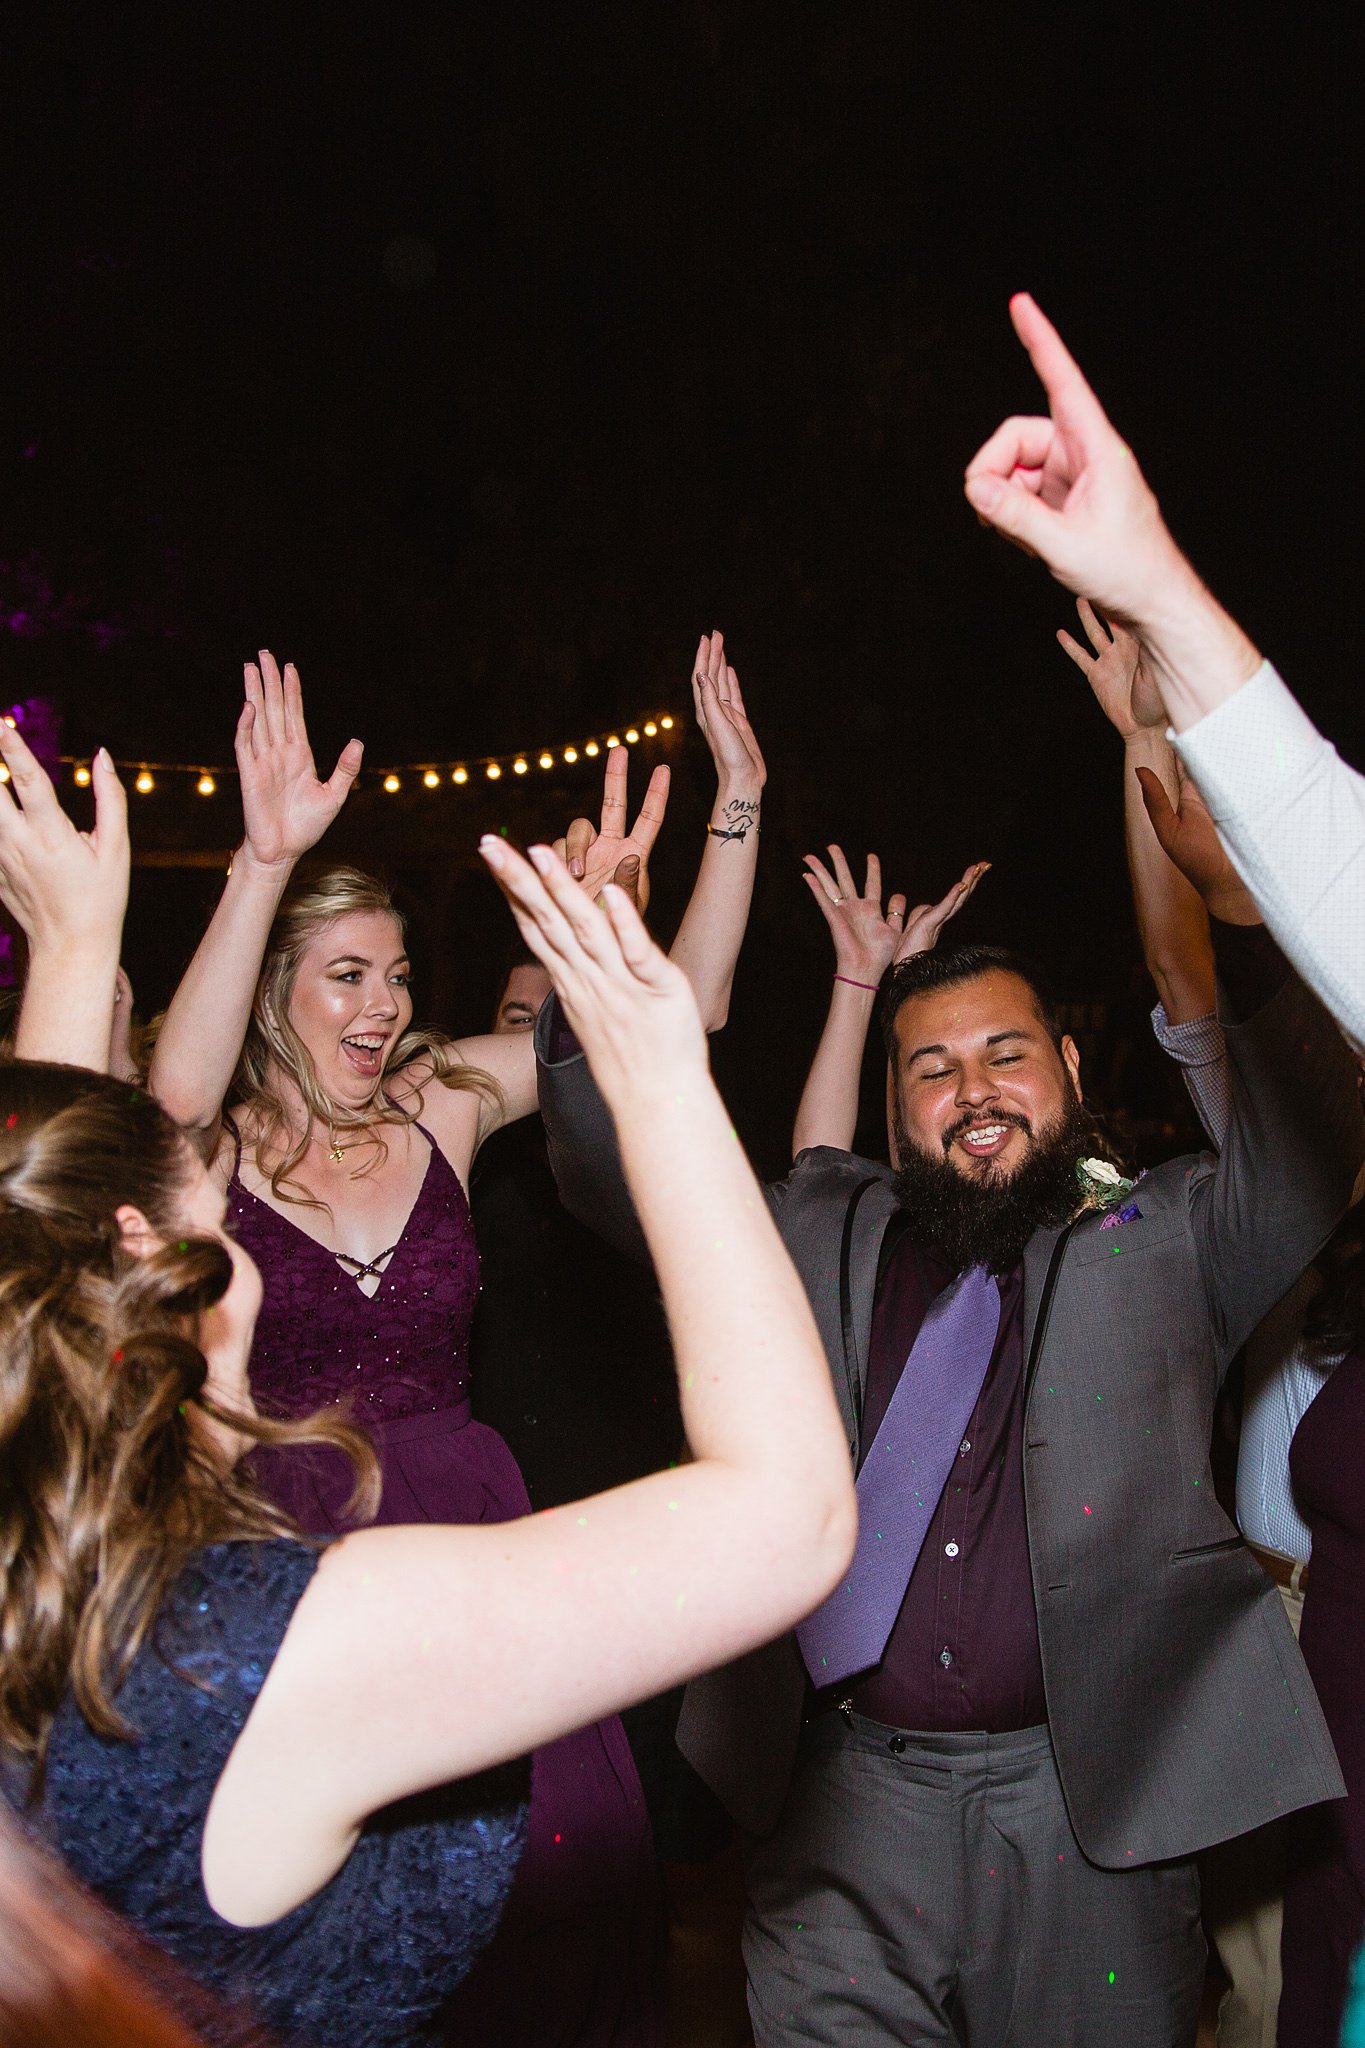 Groom having fun dancing with guests at his wedding reception by Arizona wedding photographer PMA Photography.